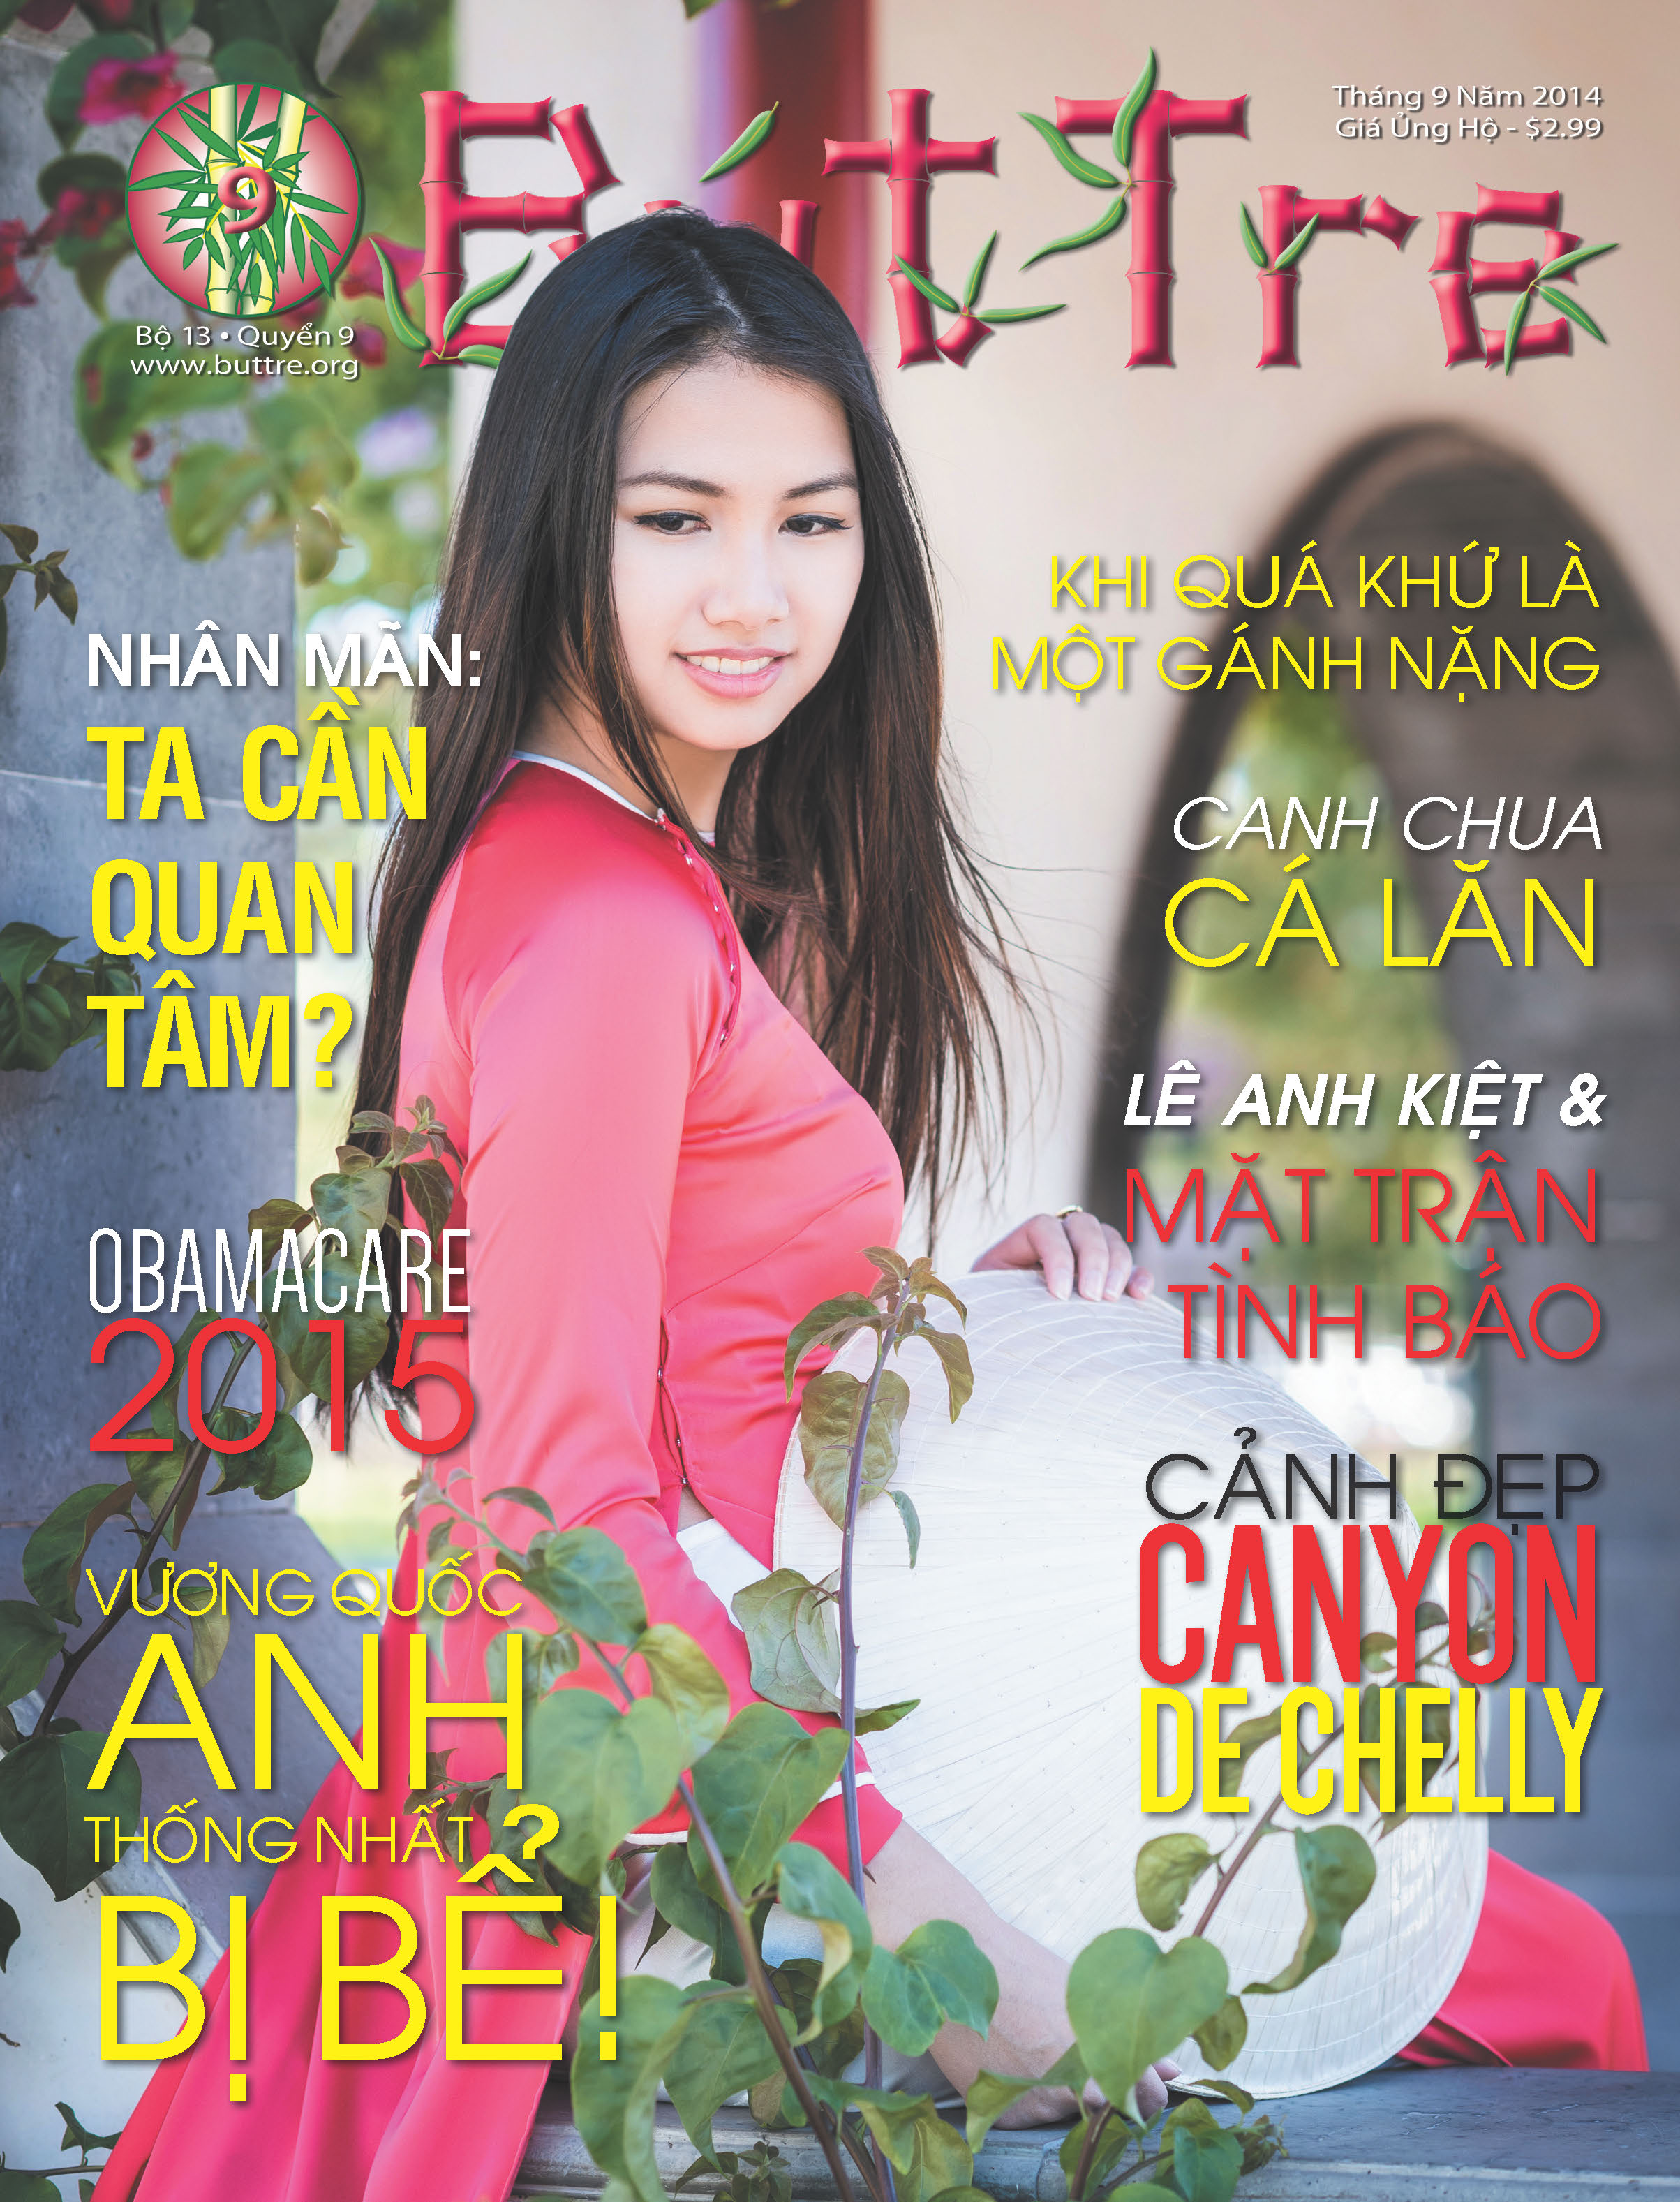 Cover Page September 2014